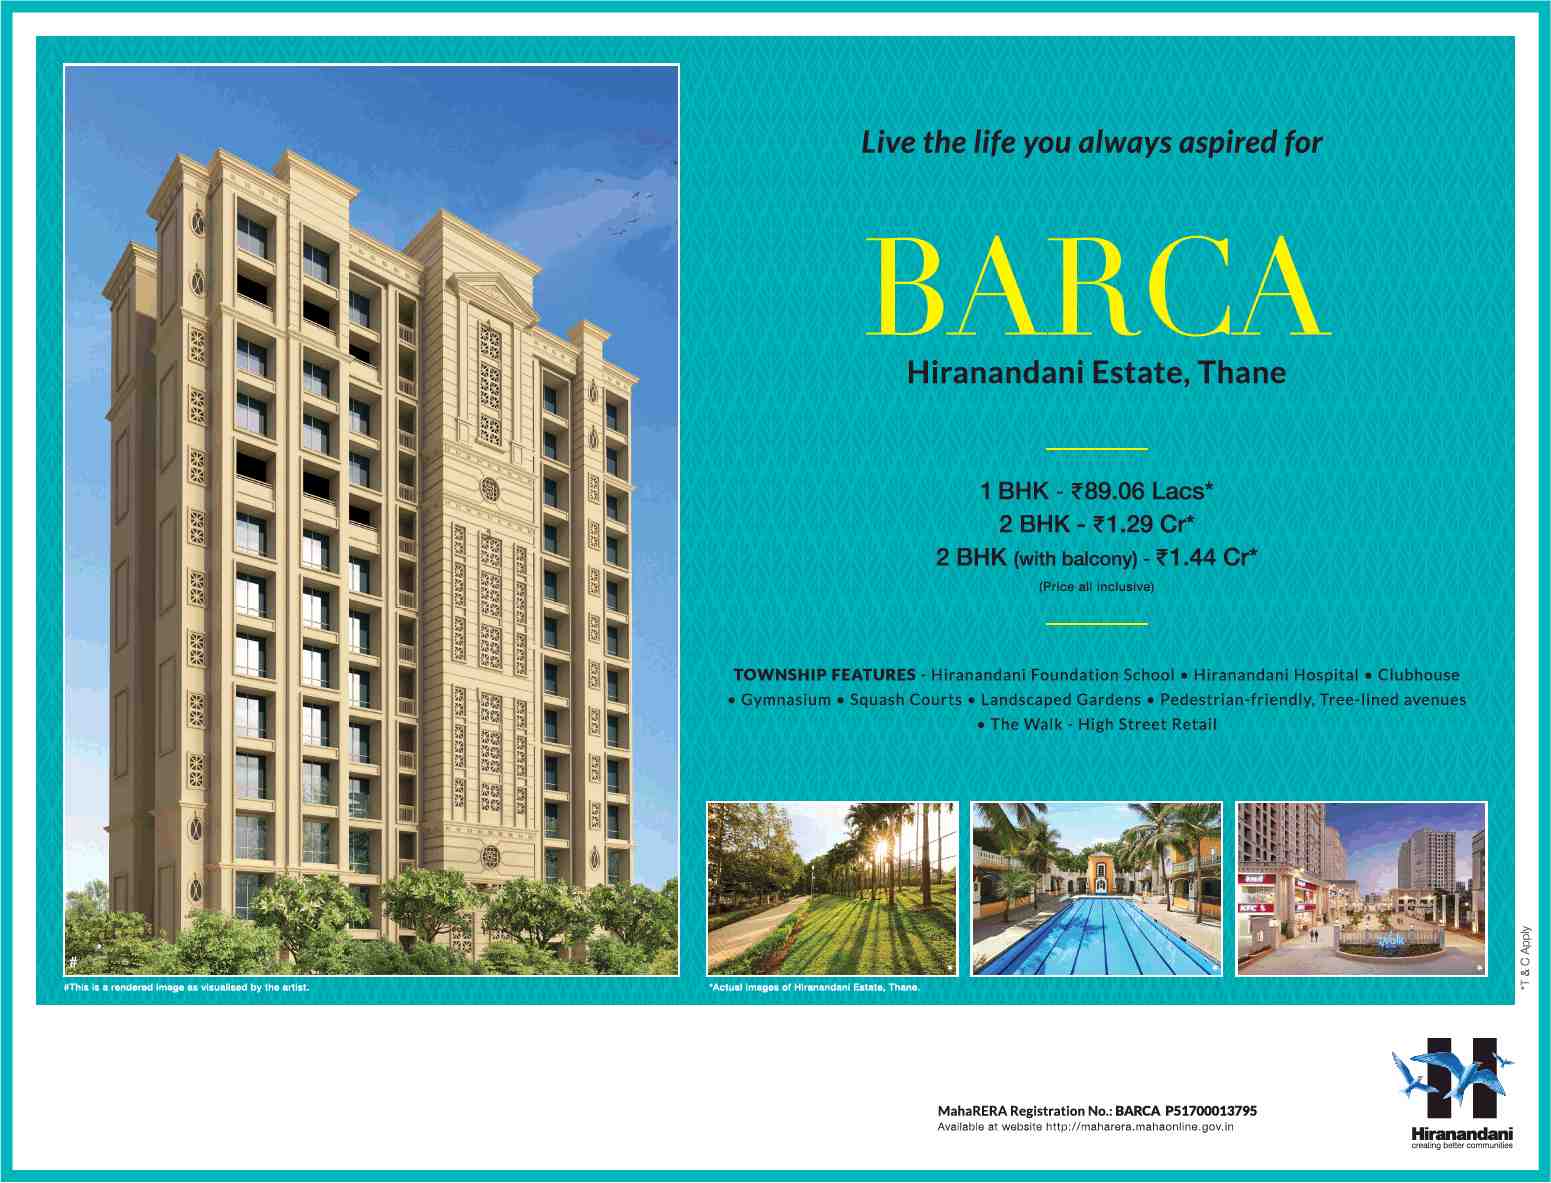 Live the life you always aspired for at Hiranandani Estate Barca in Mumbai Update